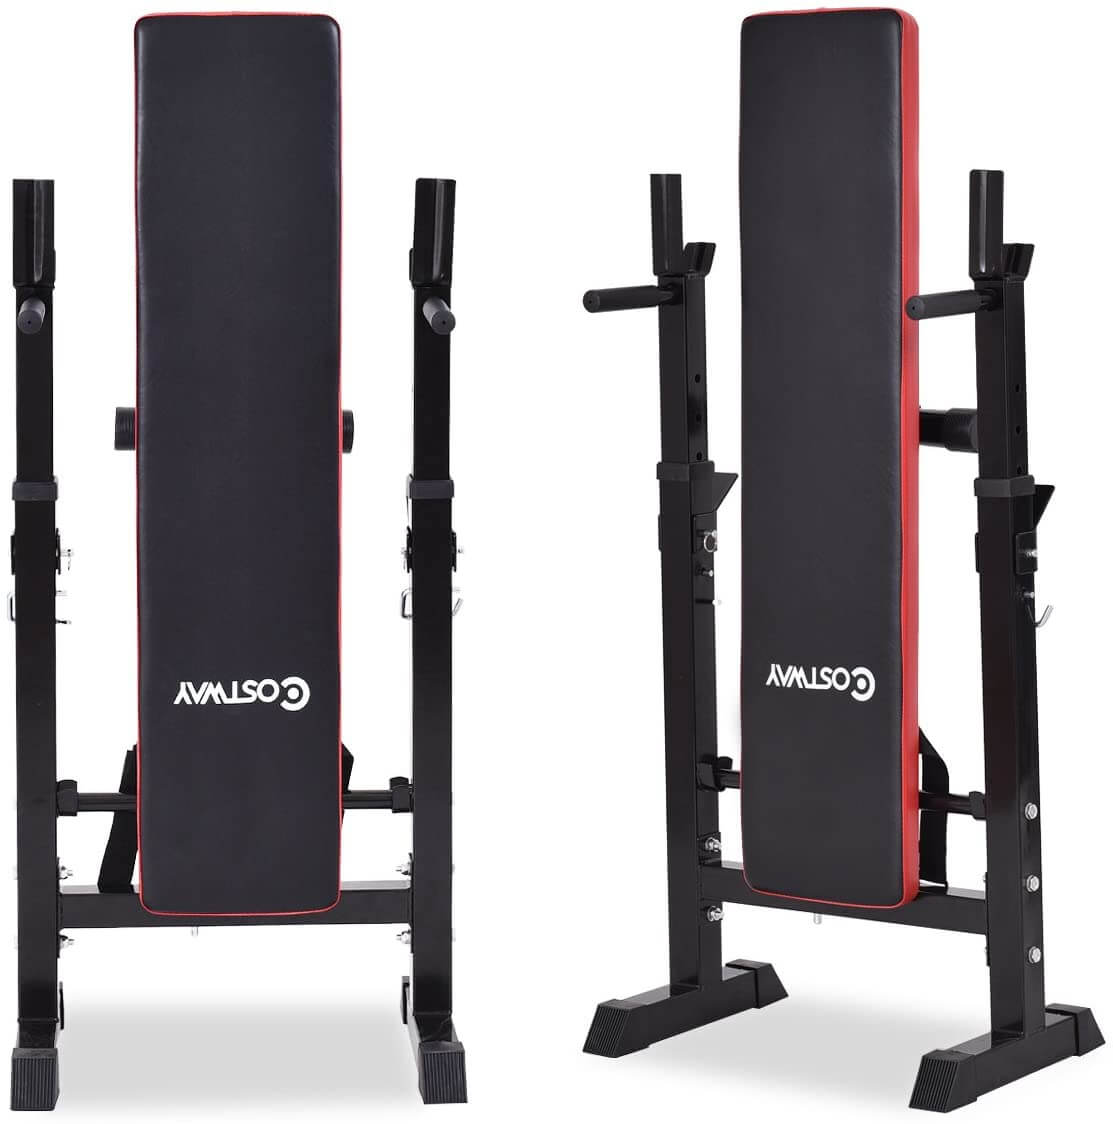 Adjustable Weight Bench Fitness Bench Home Gym Black - The Shopsite